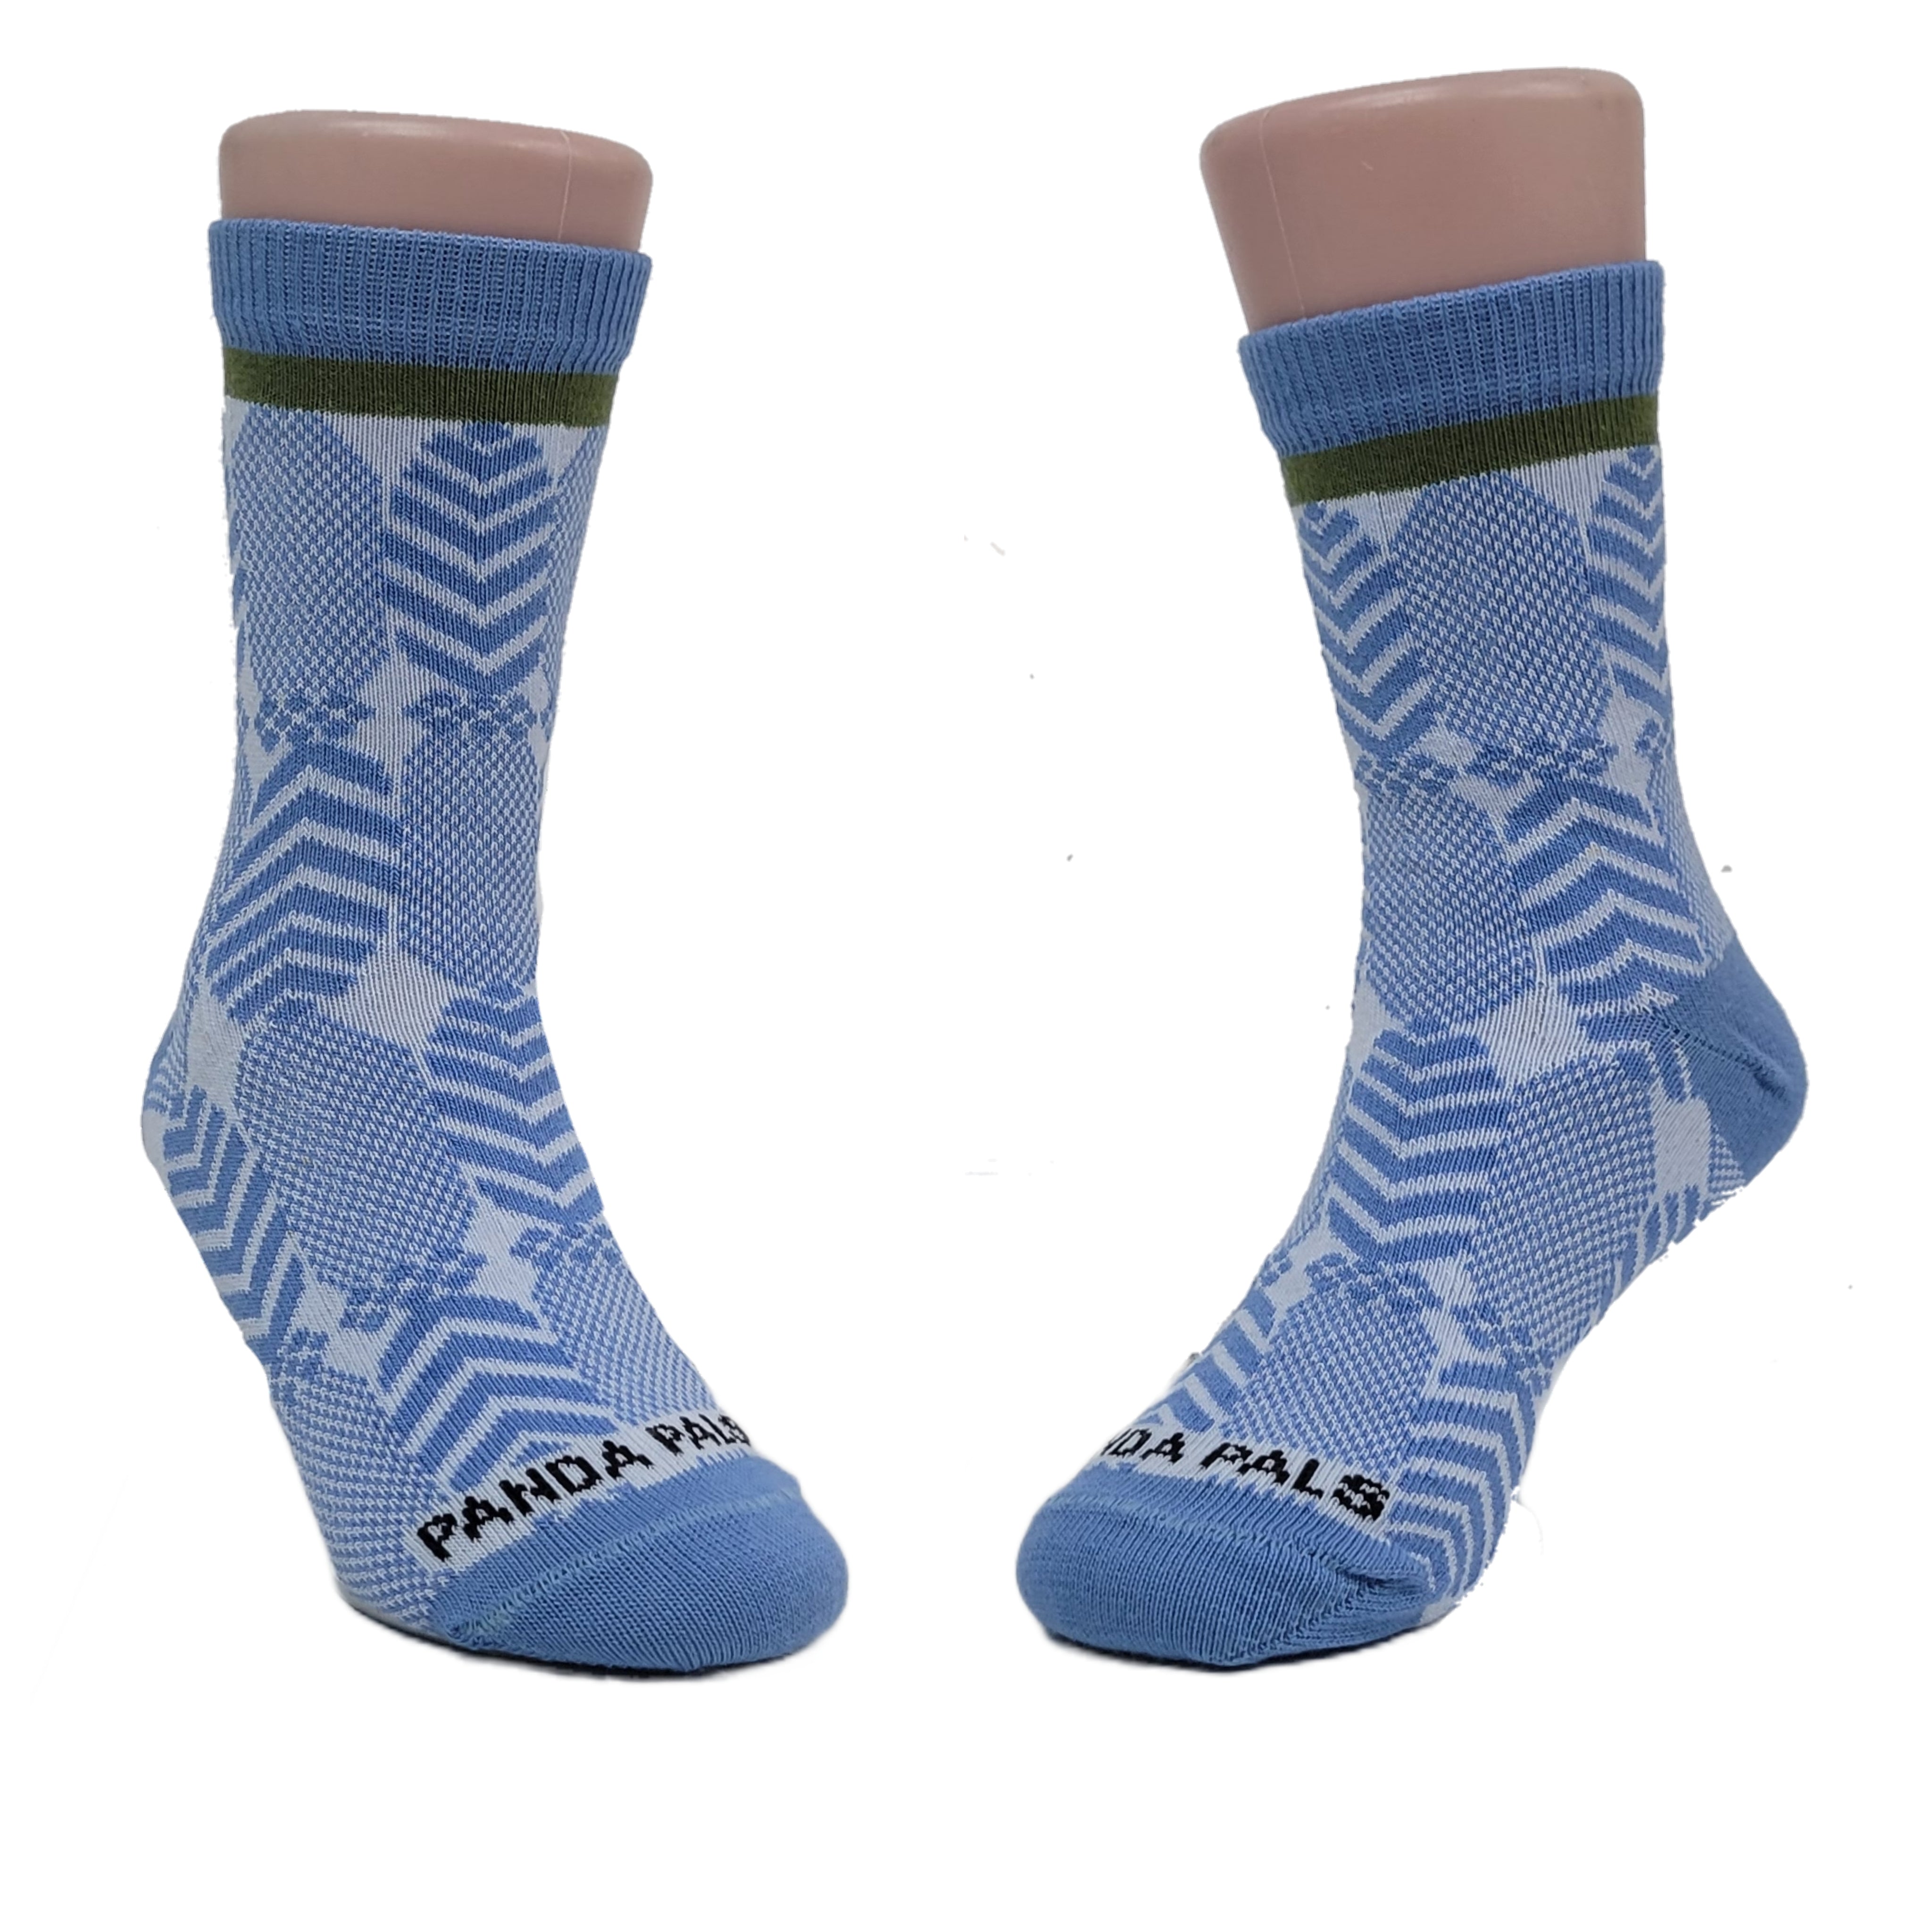 Sophisticated Blue Pattern Socks (Ages 3-5)